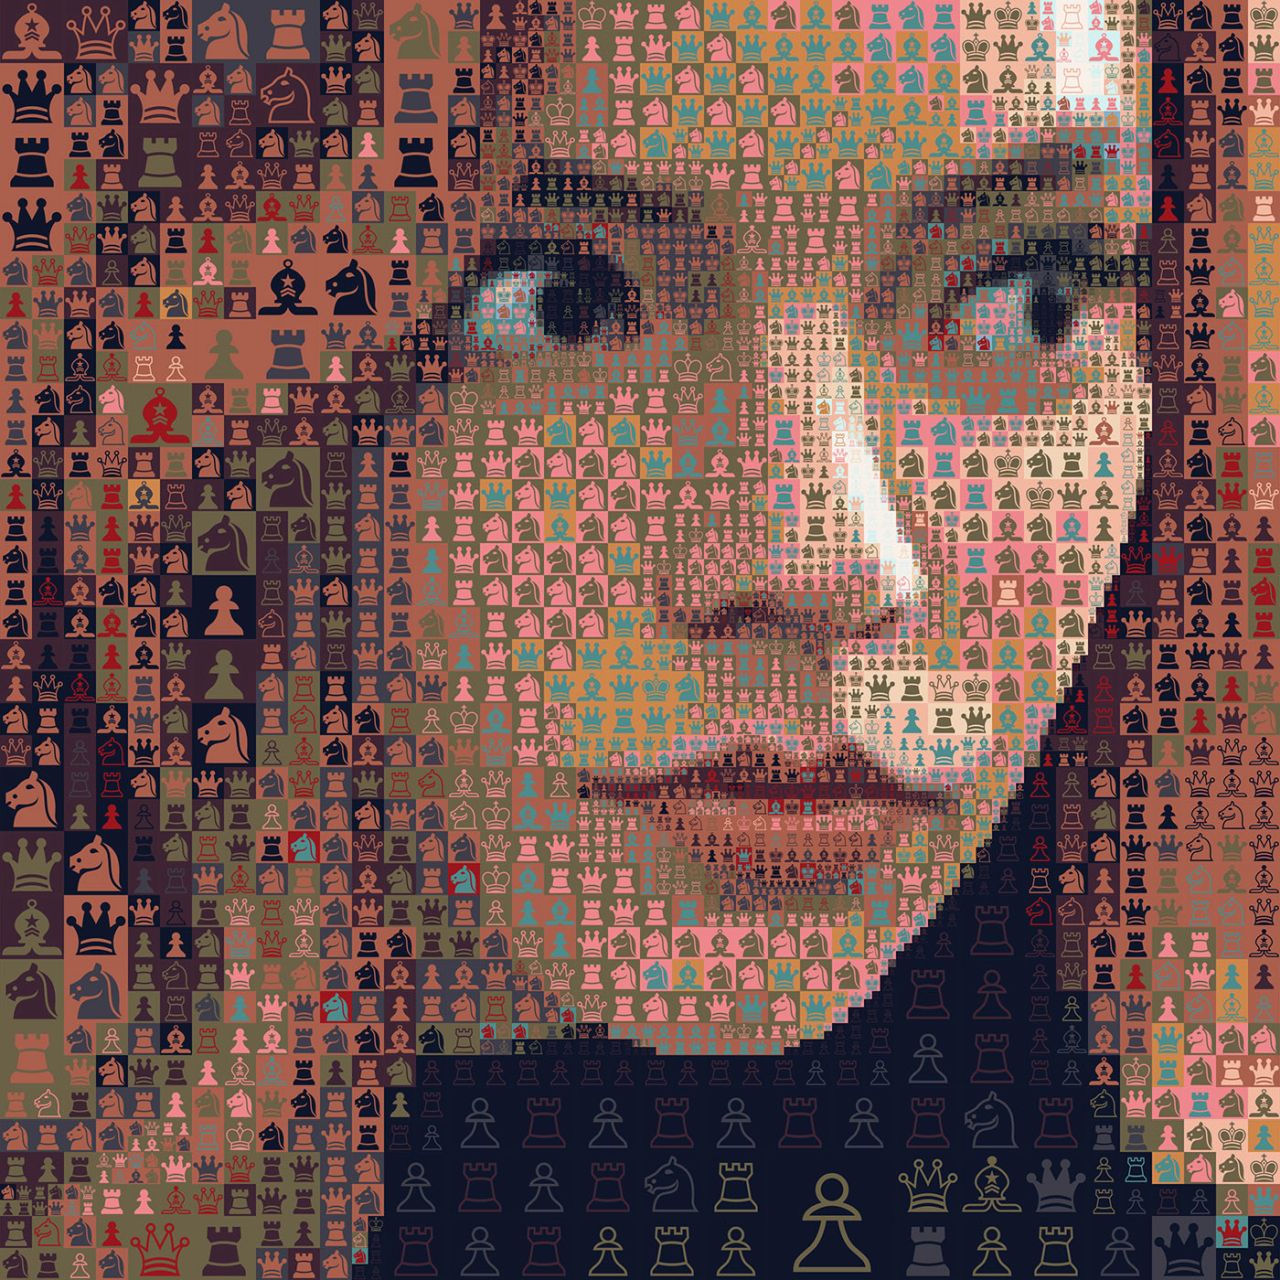 photo mosaic queen gambit by charis tsevis